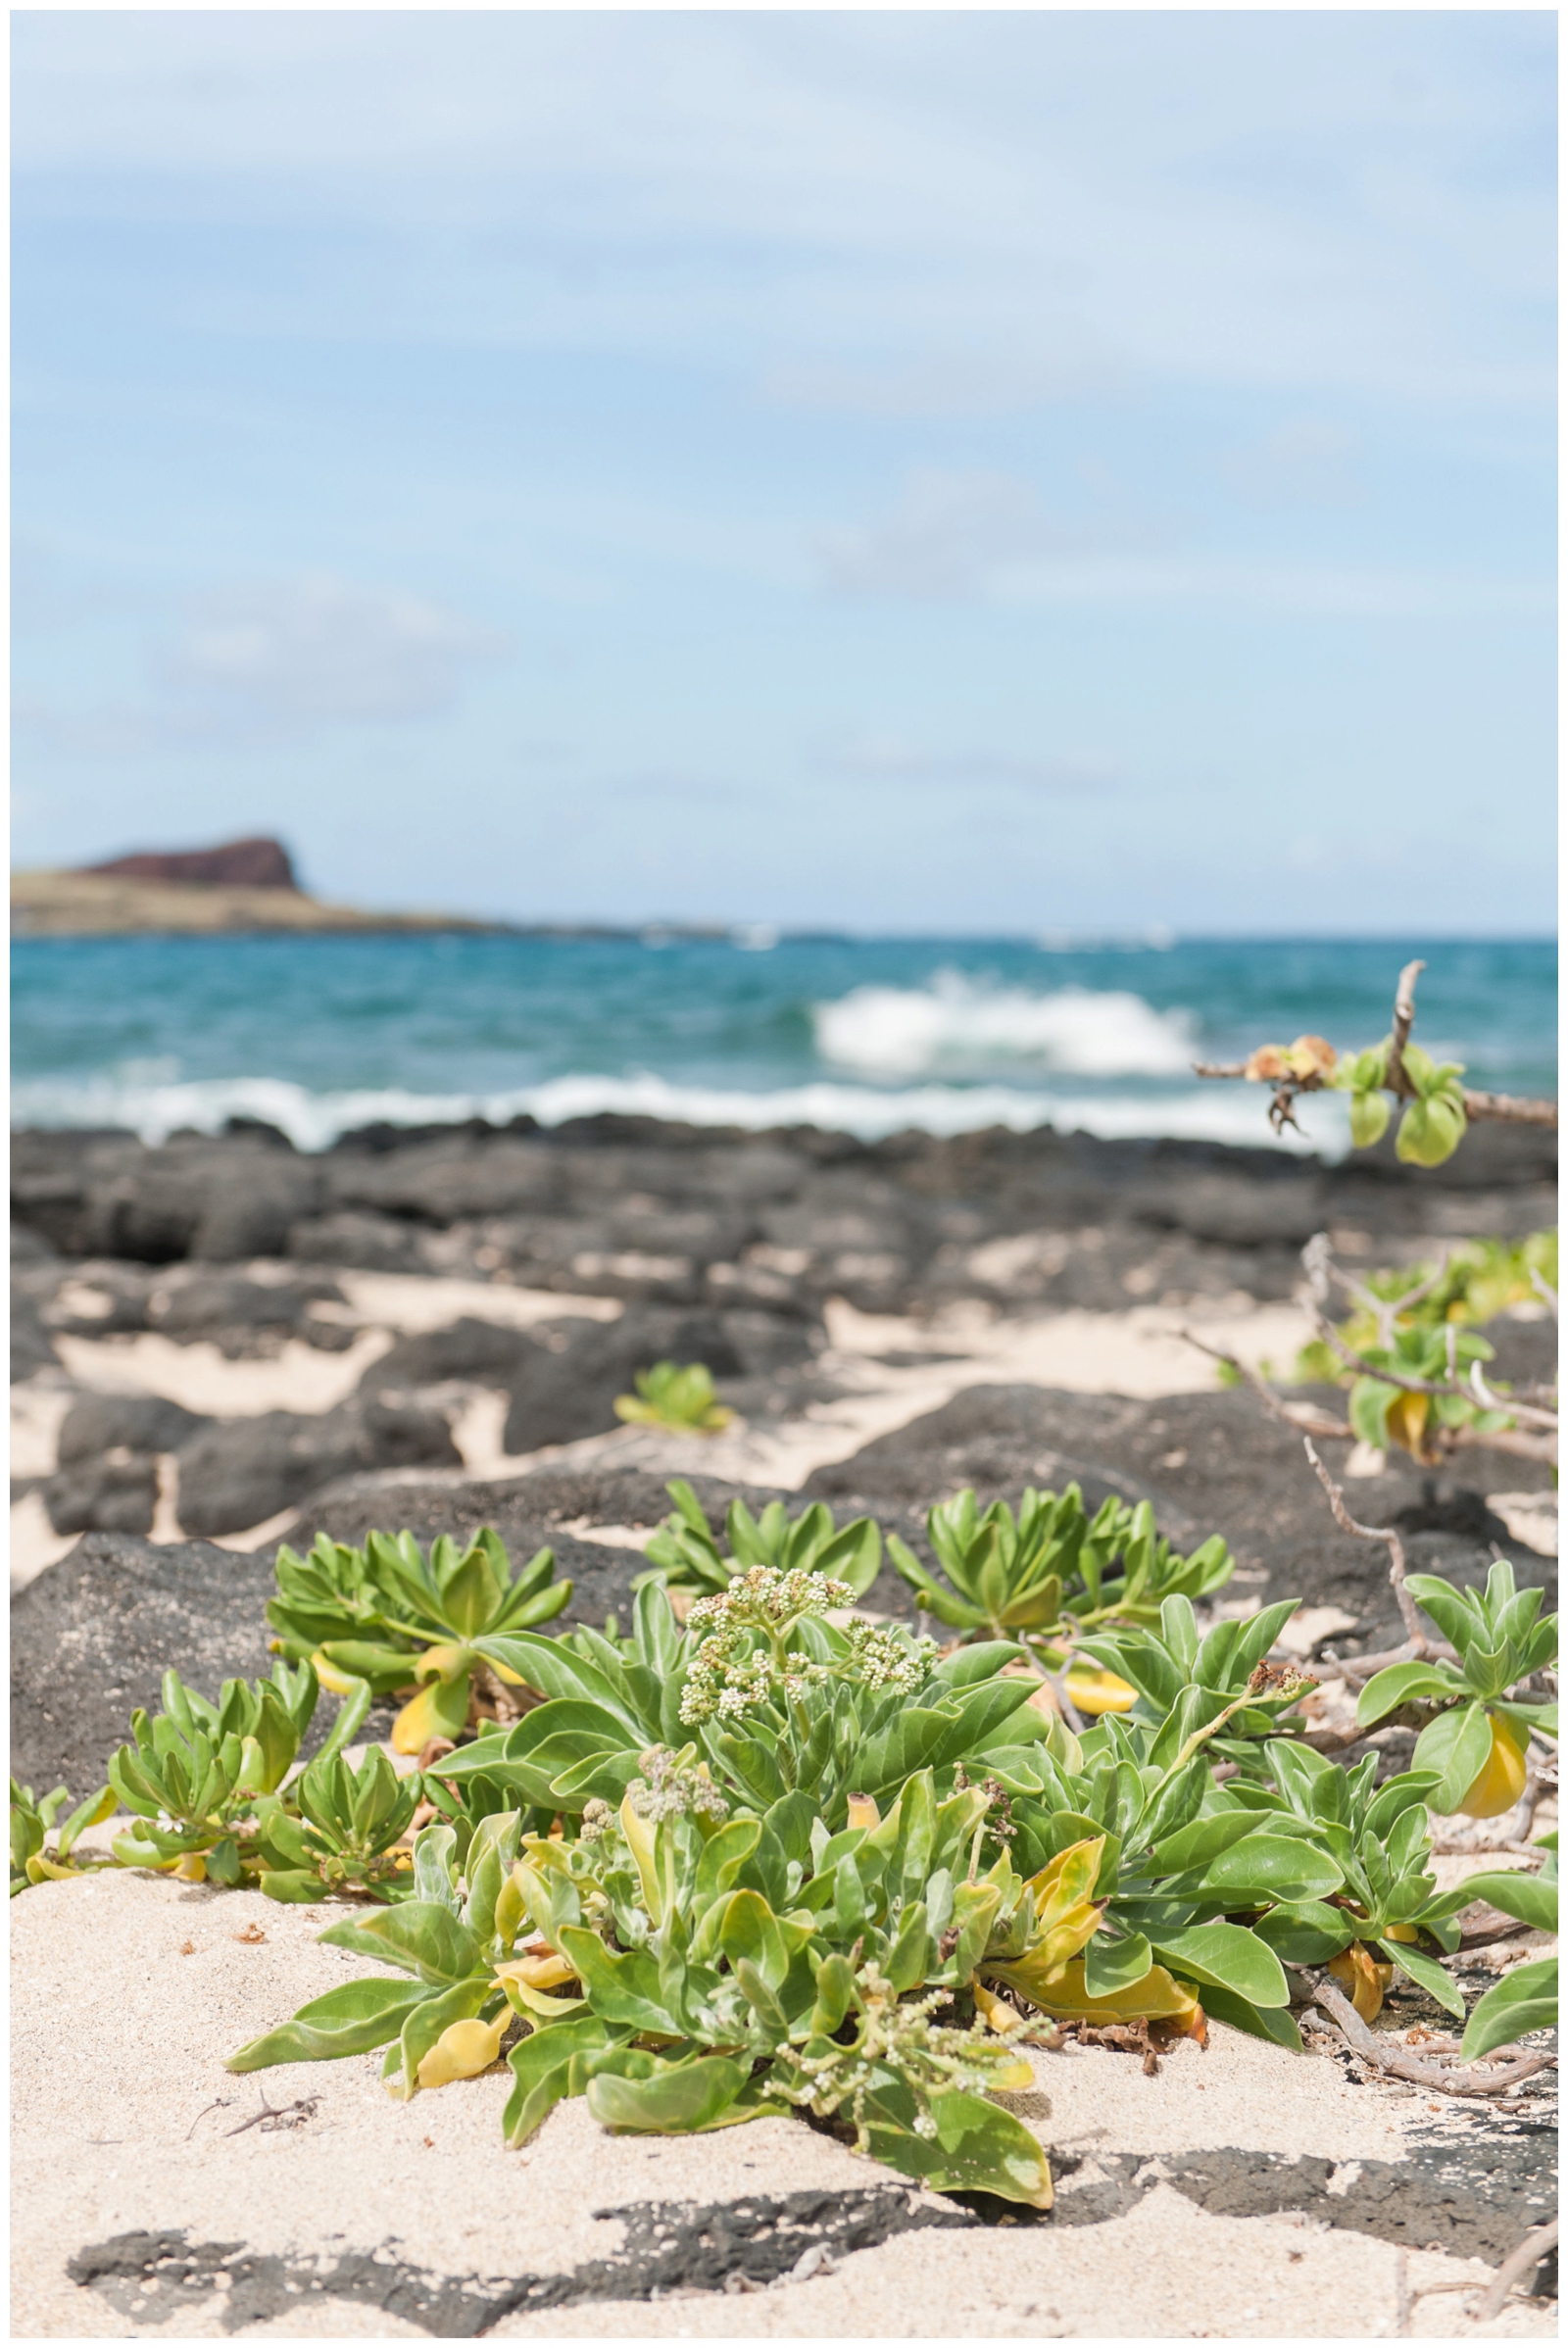 Ocean Waves crashing over lava rocks in Oahu hawaii at Kaupo Beach with a native green plant in focus 